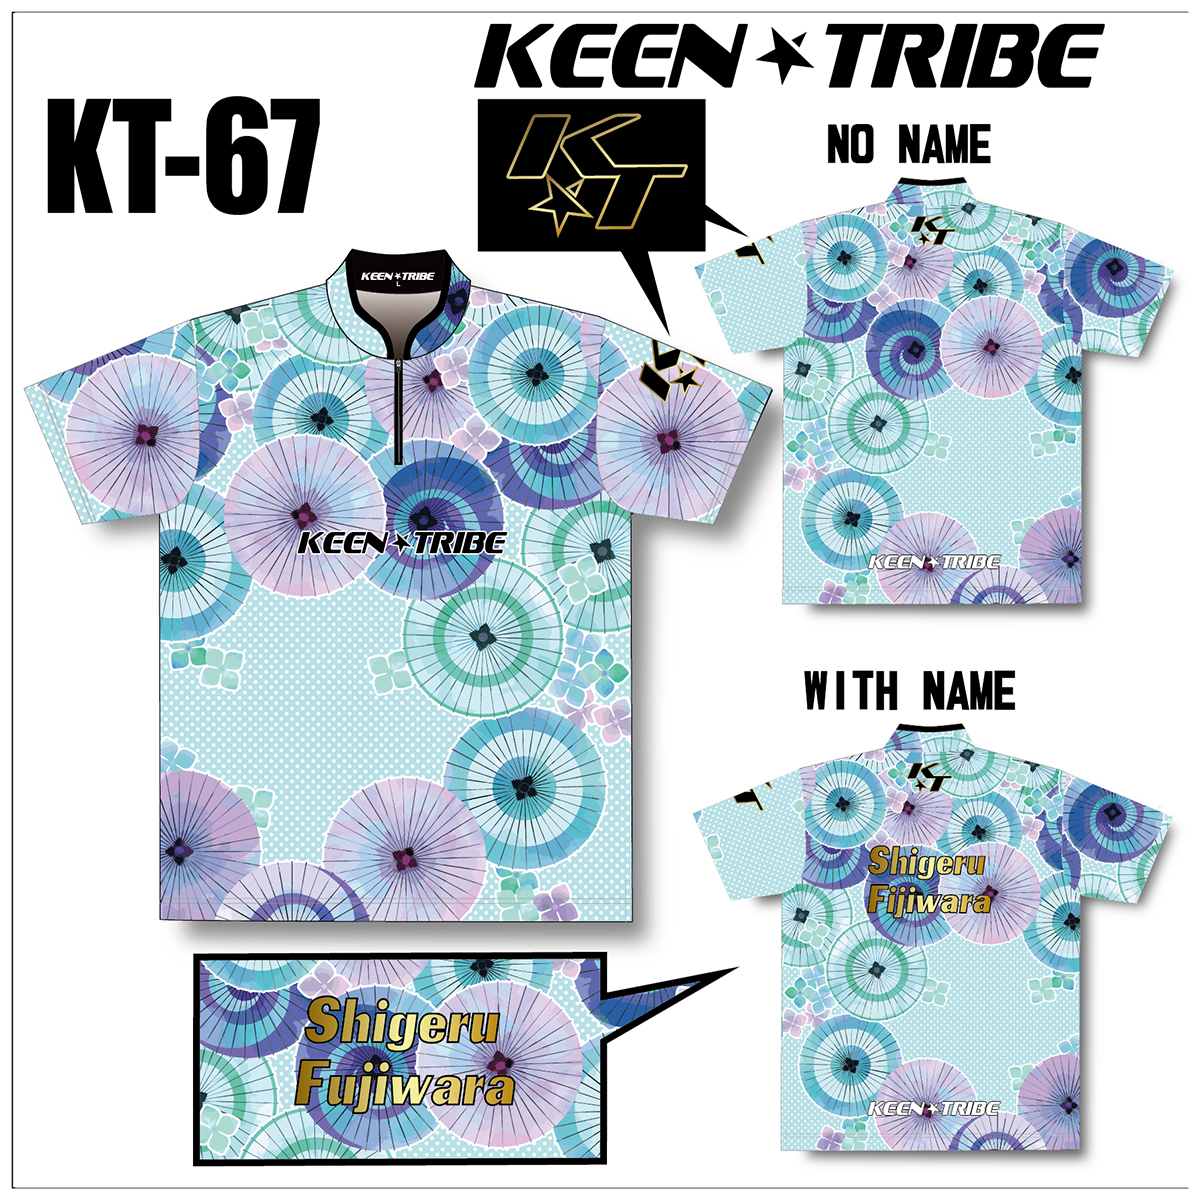 KEEN ★ TRIBE　KT-67(受注生産)